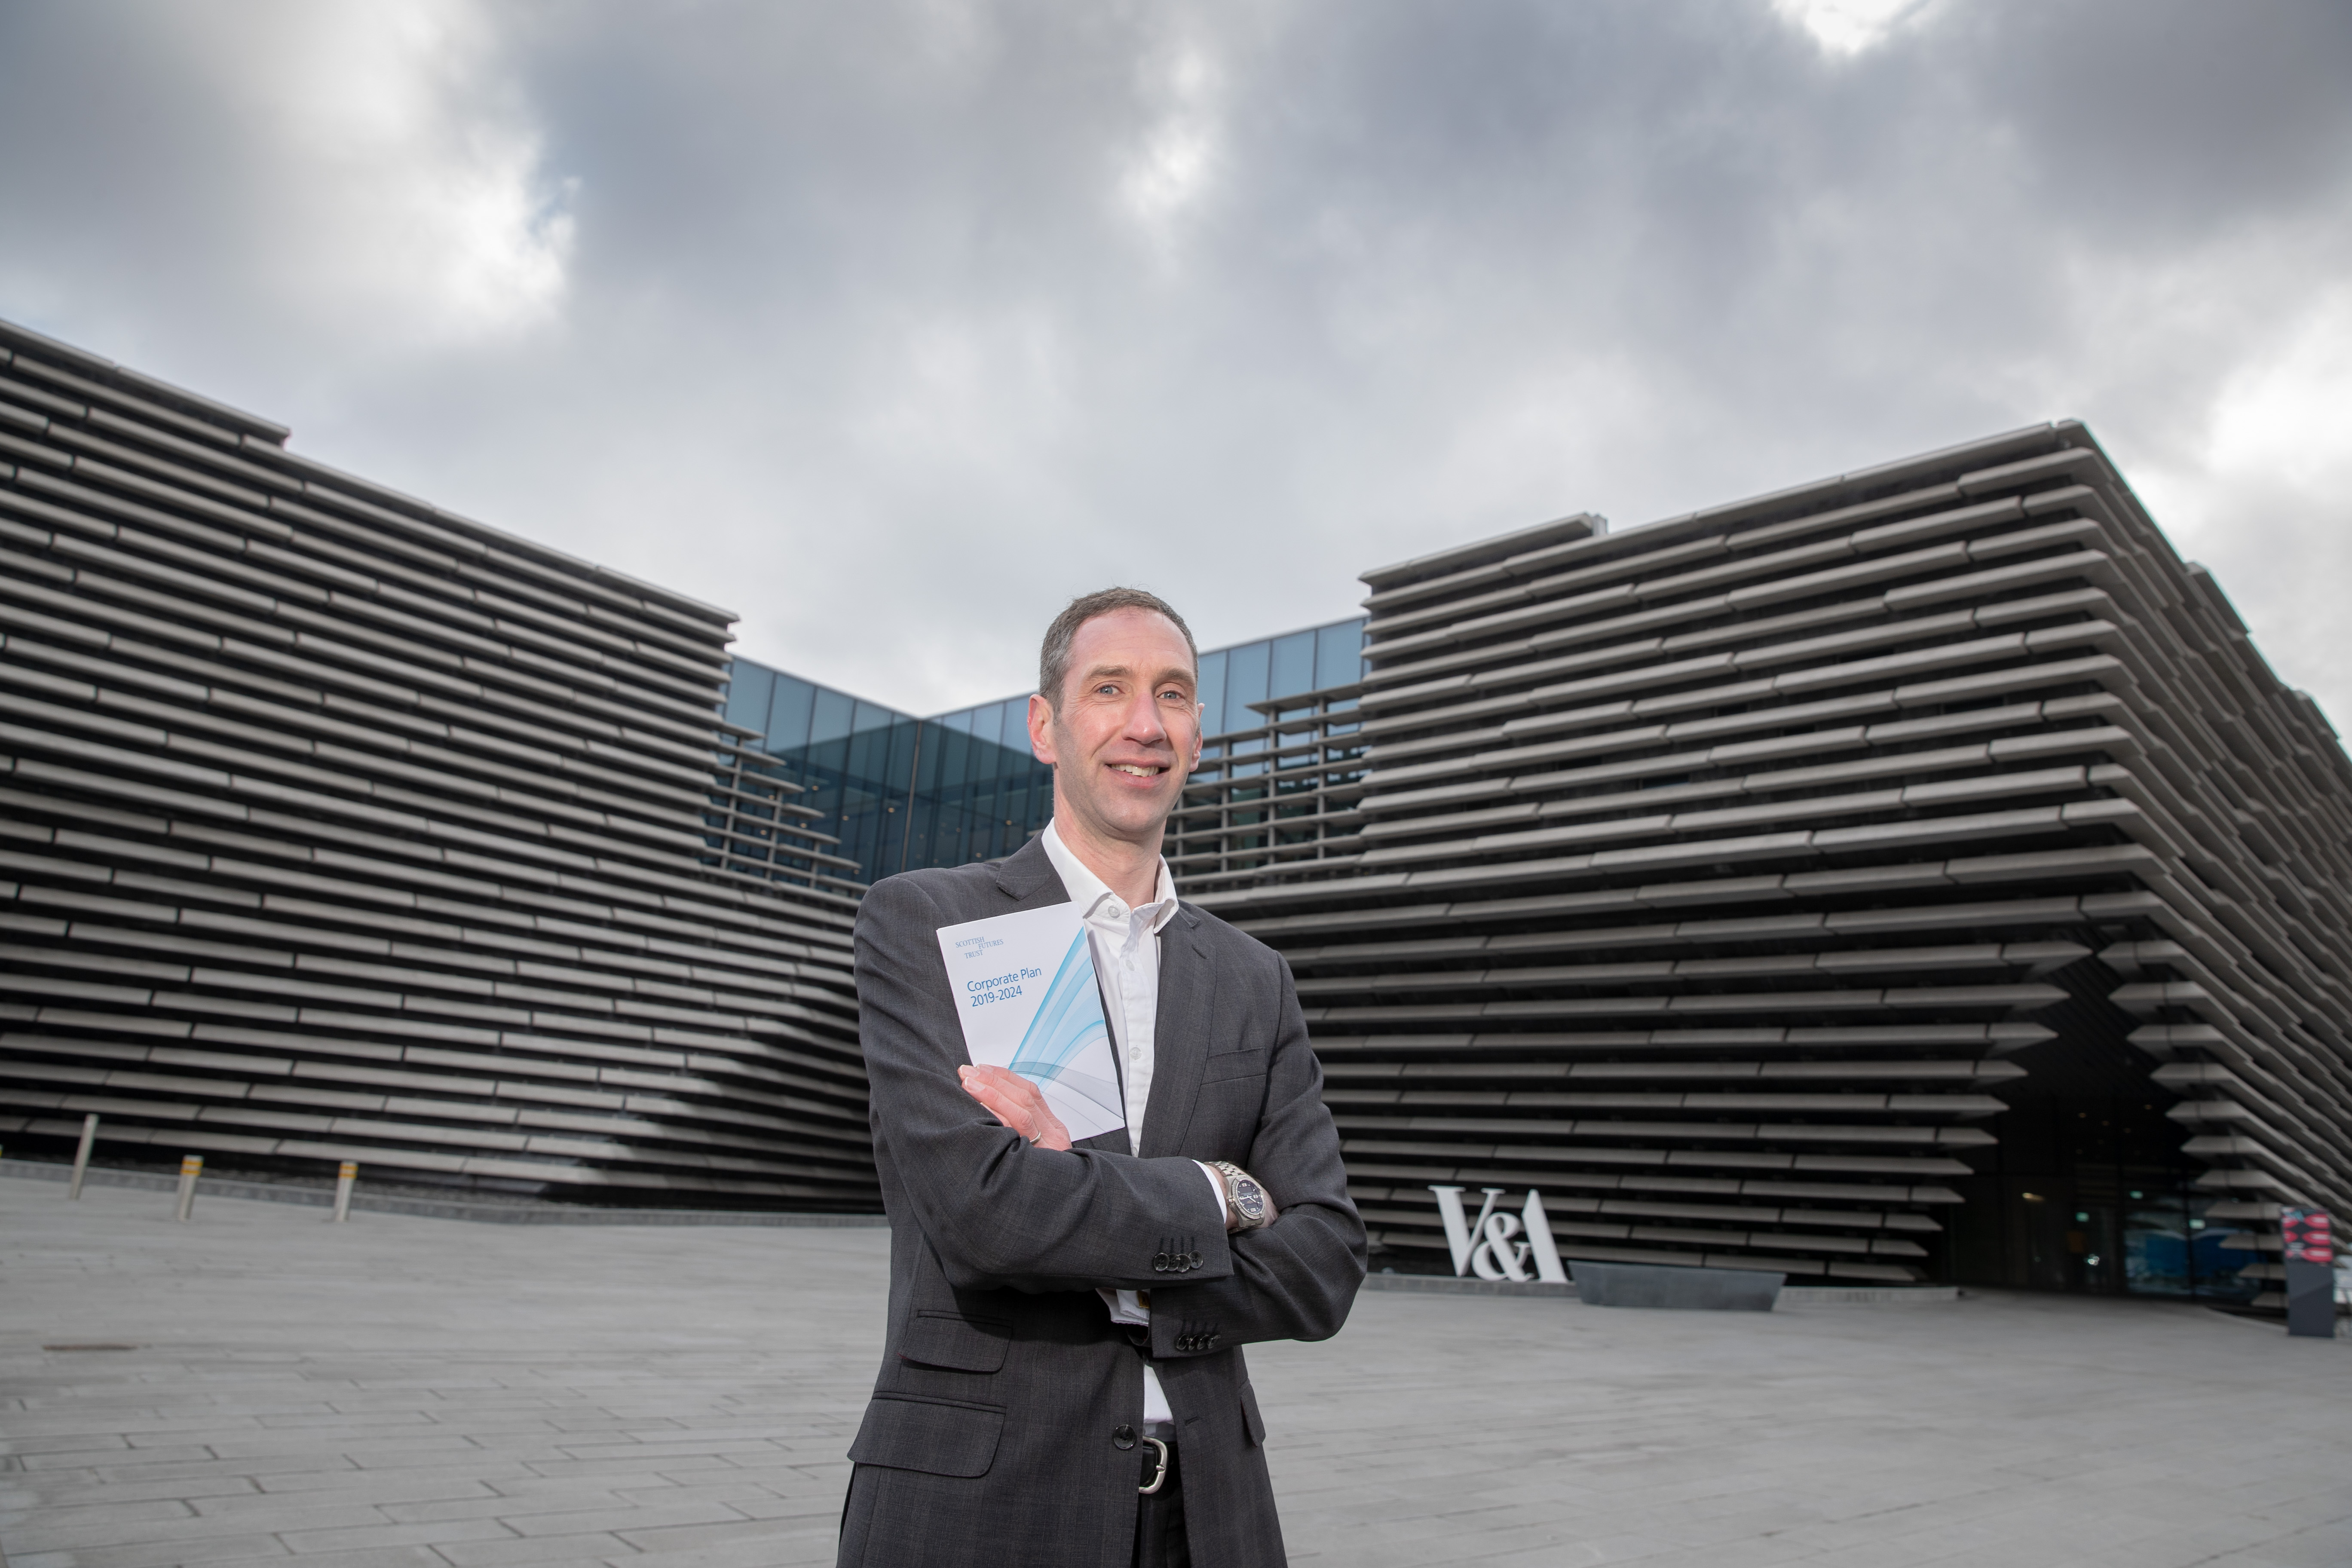 Scottish Futures Trust publishes five-year corporate plan for ‘world-class’ infrastructure